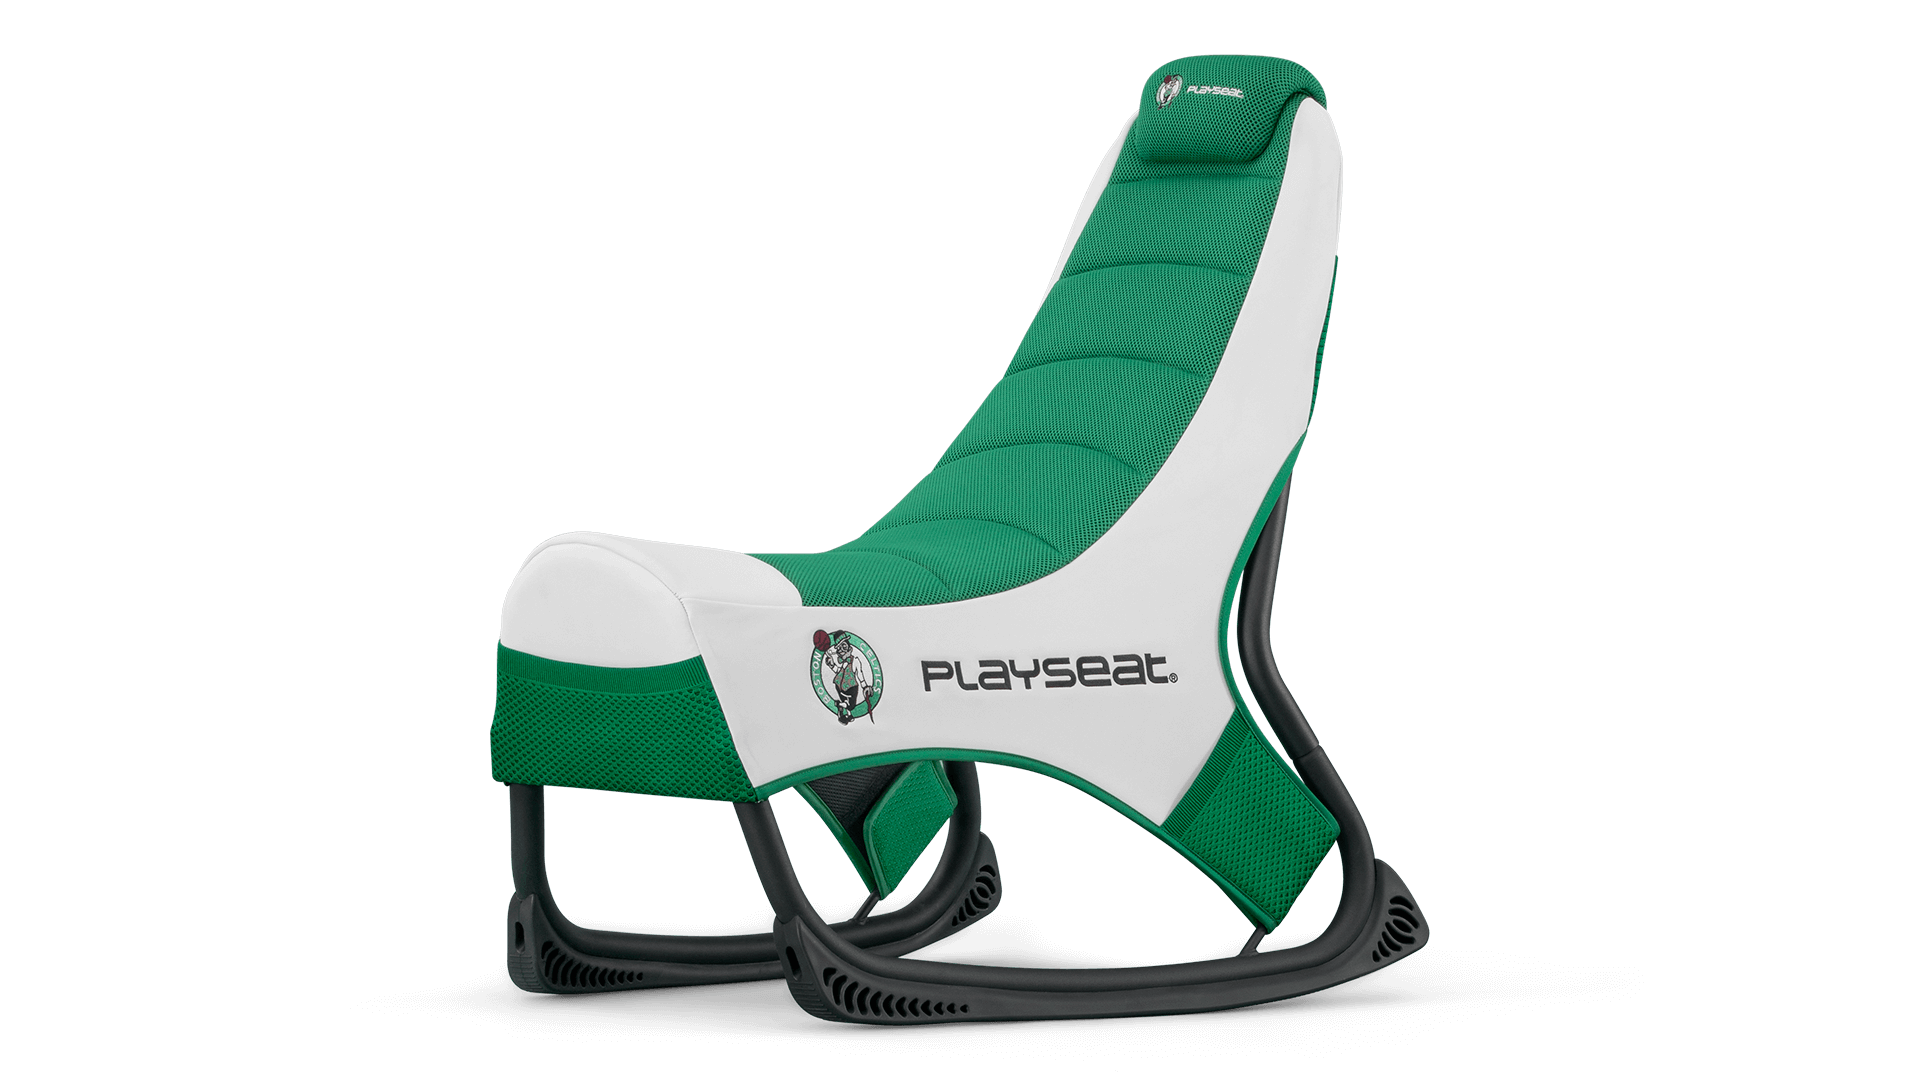 playseat-go-nba-boston-celtics-gaming-seat-front-angle-view-48-1920x1080.png